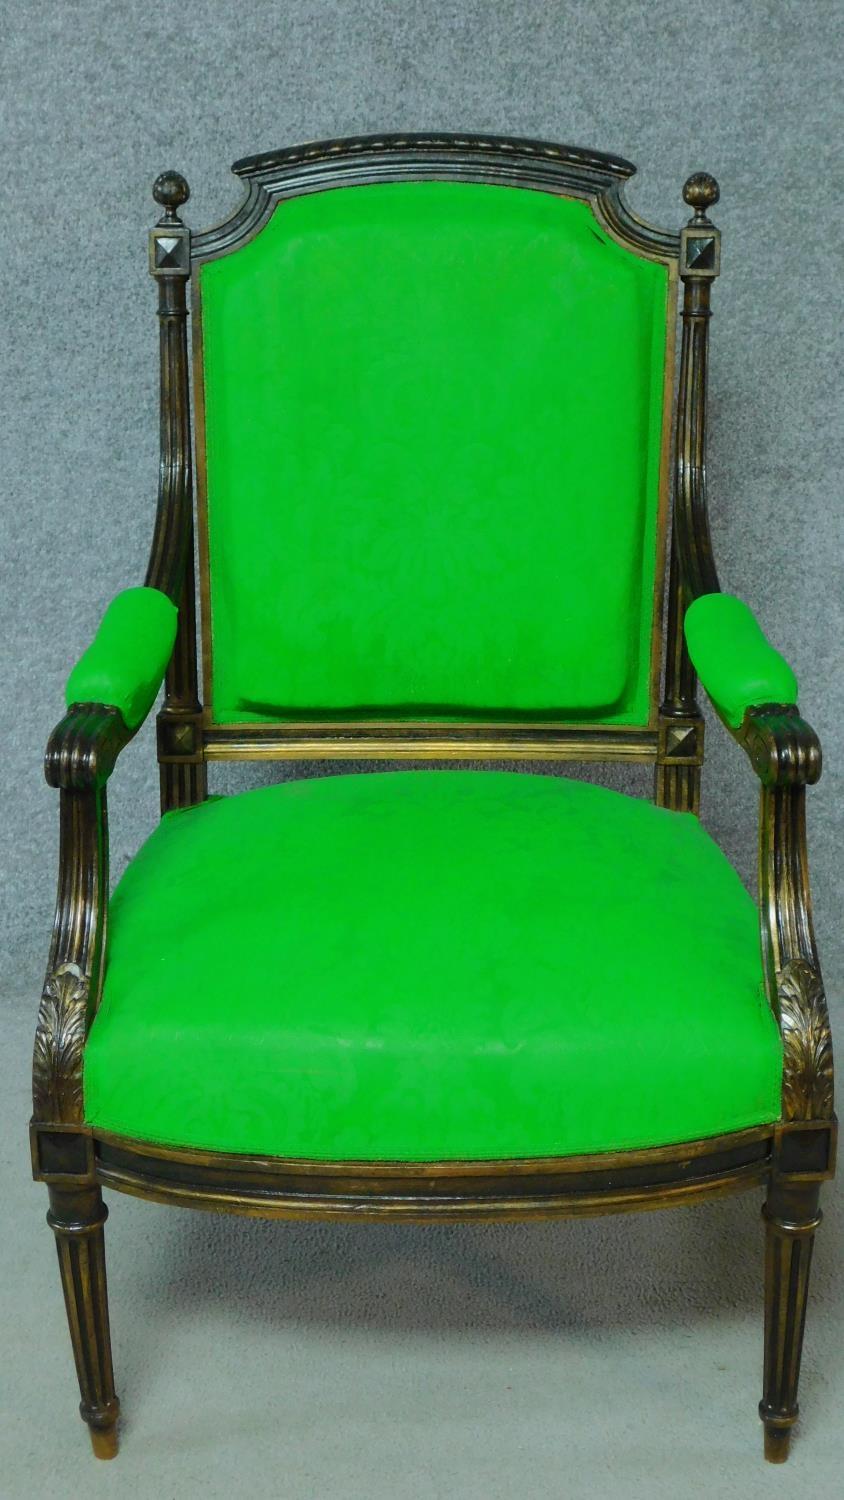 A 19th century French walnut armchair in vibrant green fabric painted upholstery. H.98cm